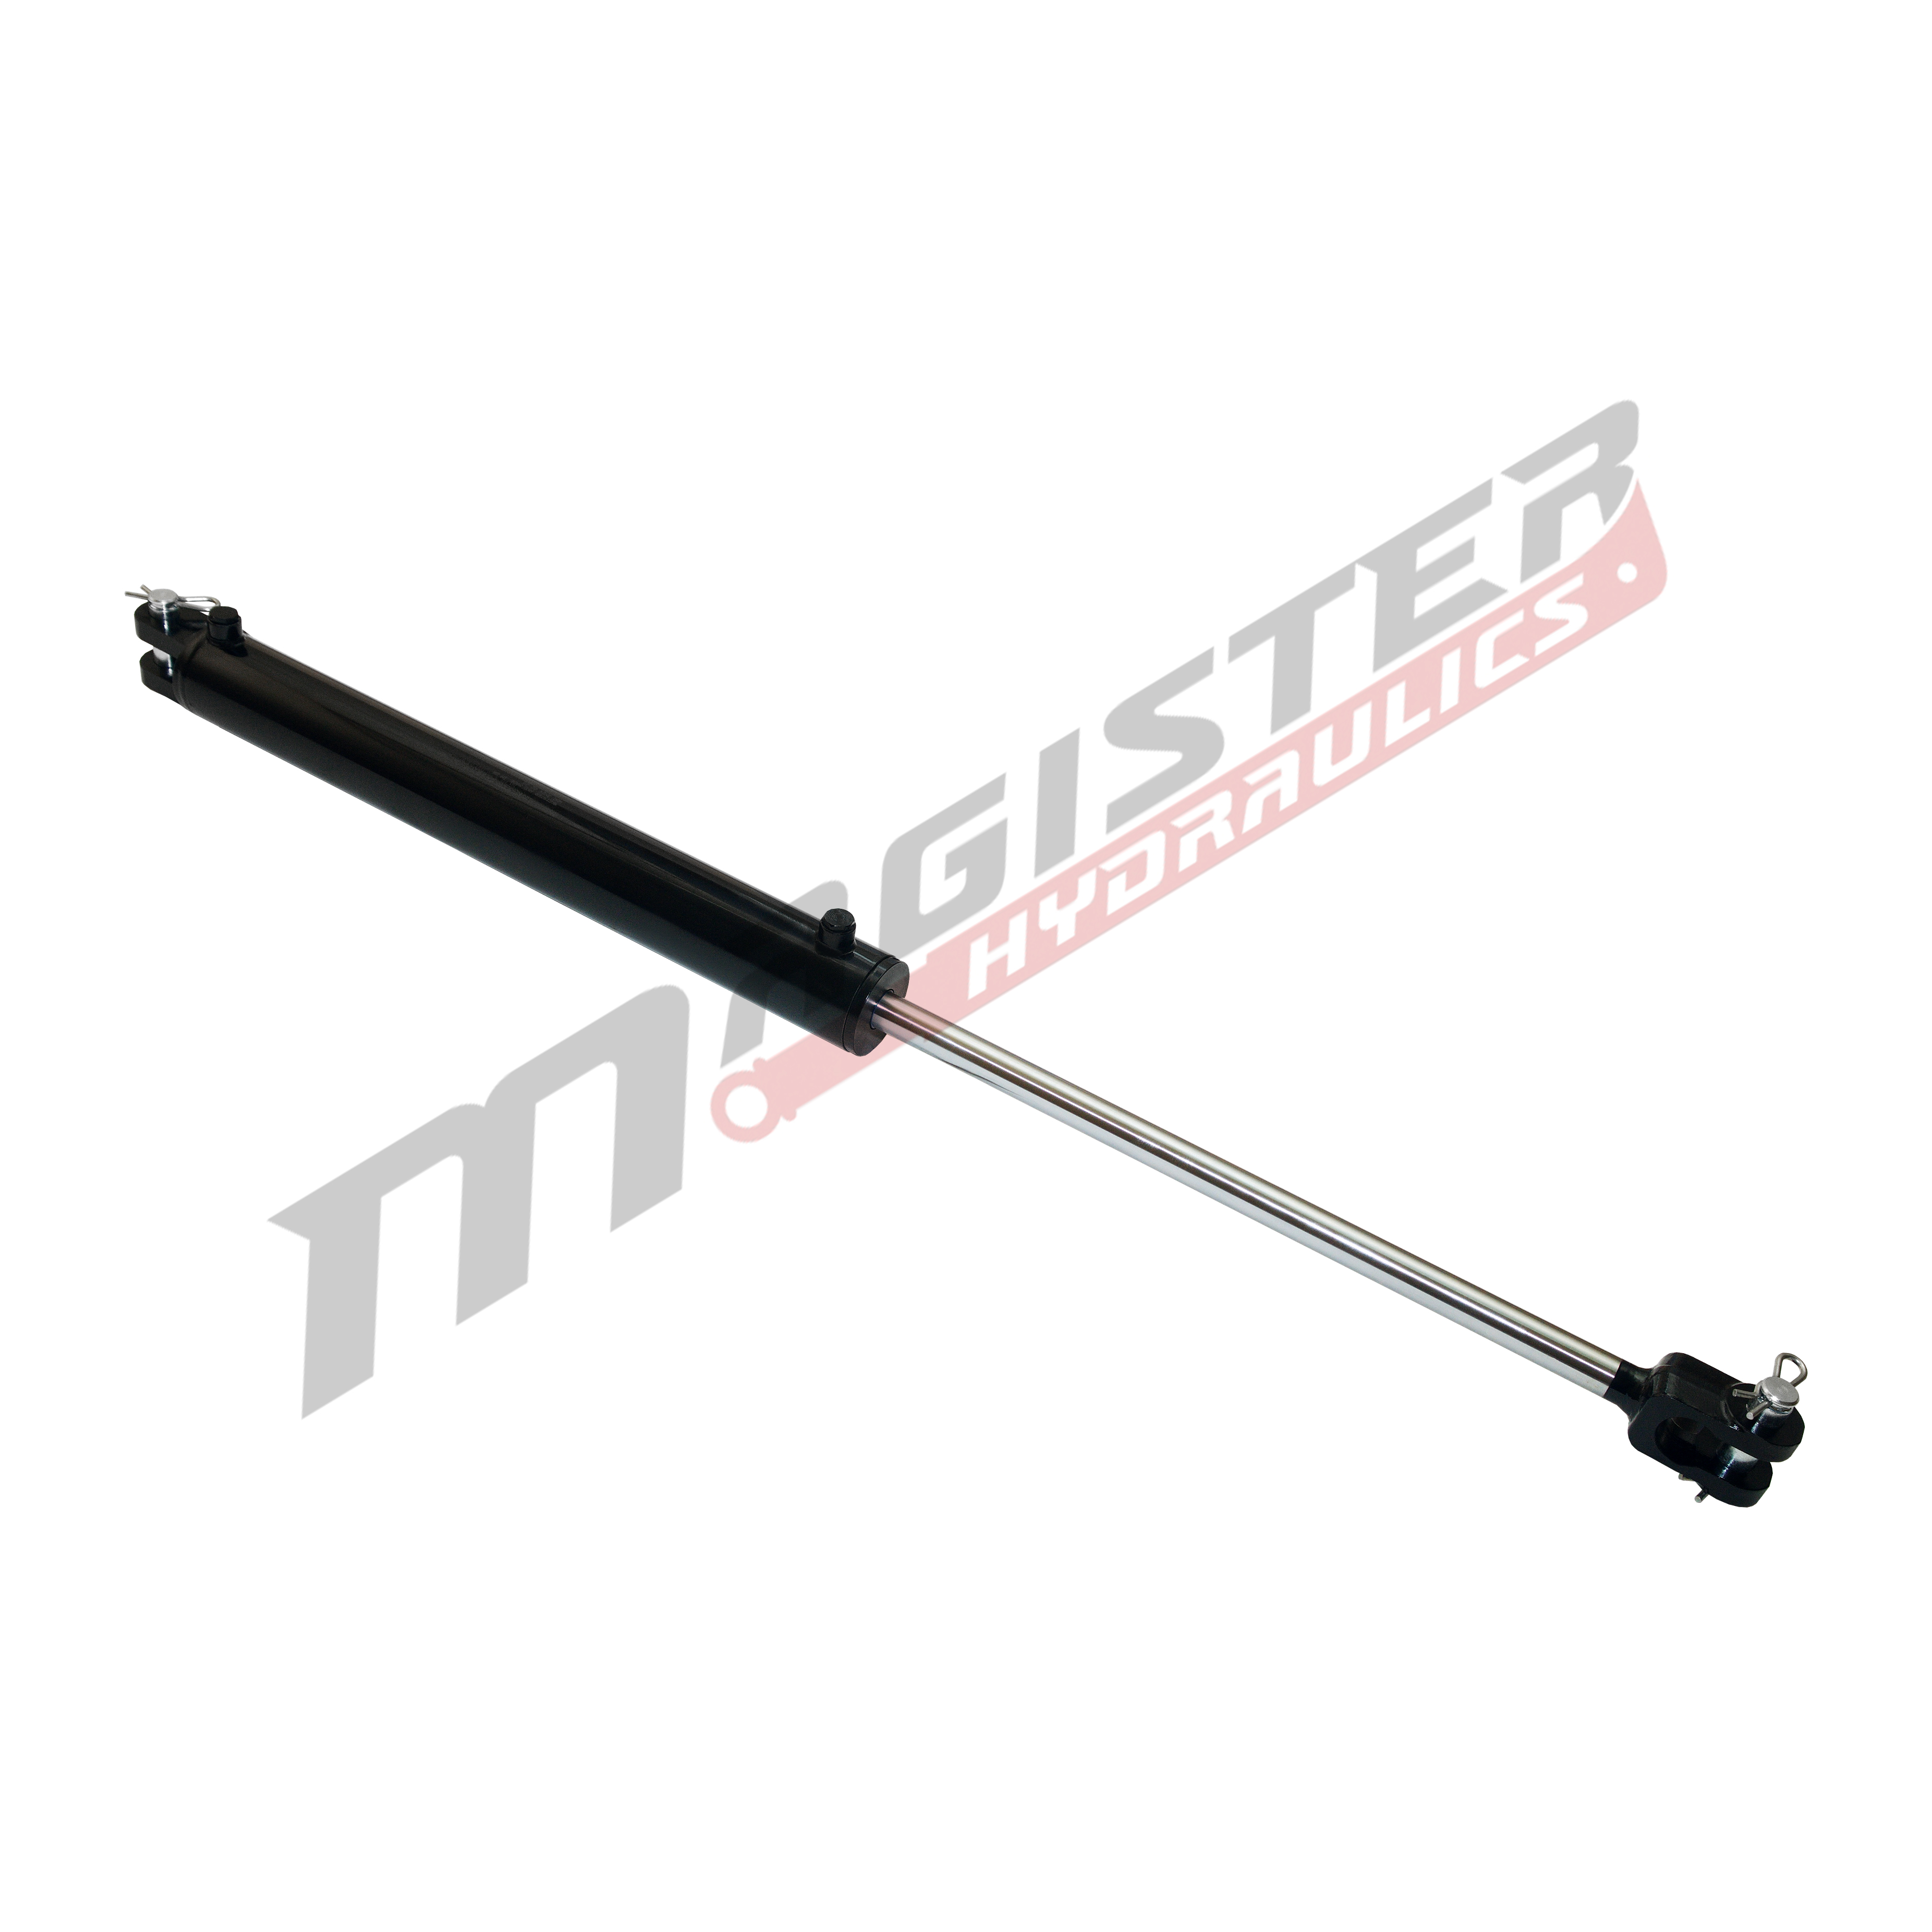 4 bore x 8 ASAE stroke hydraulic cylinder, ag clevis double acting cylinder | Magister Hydraulics